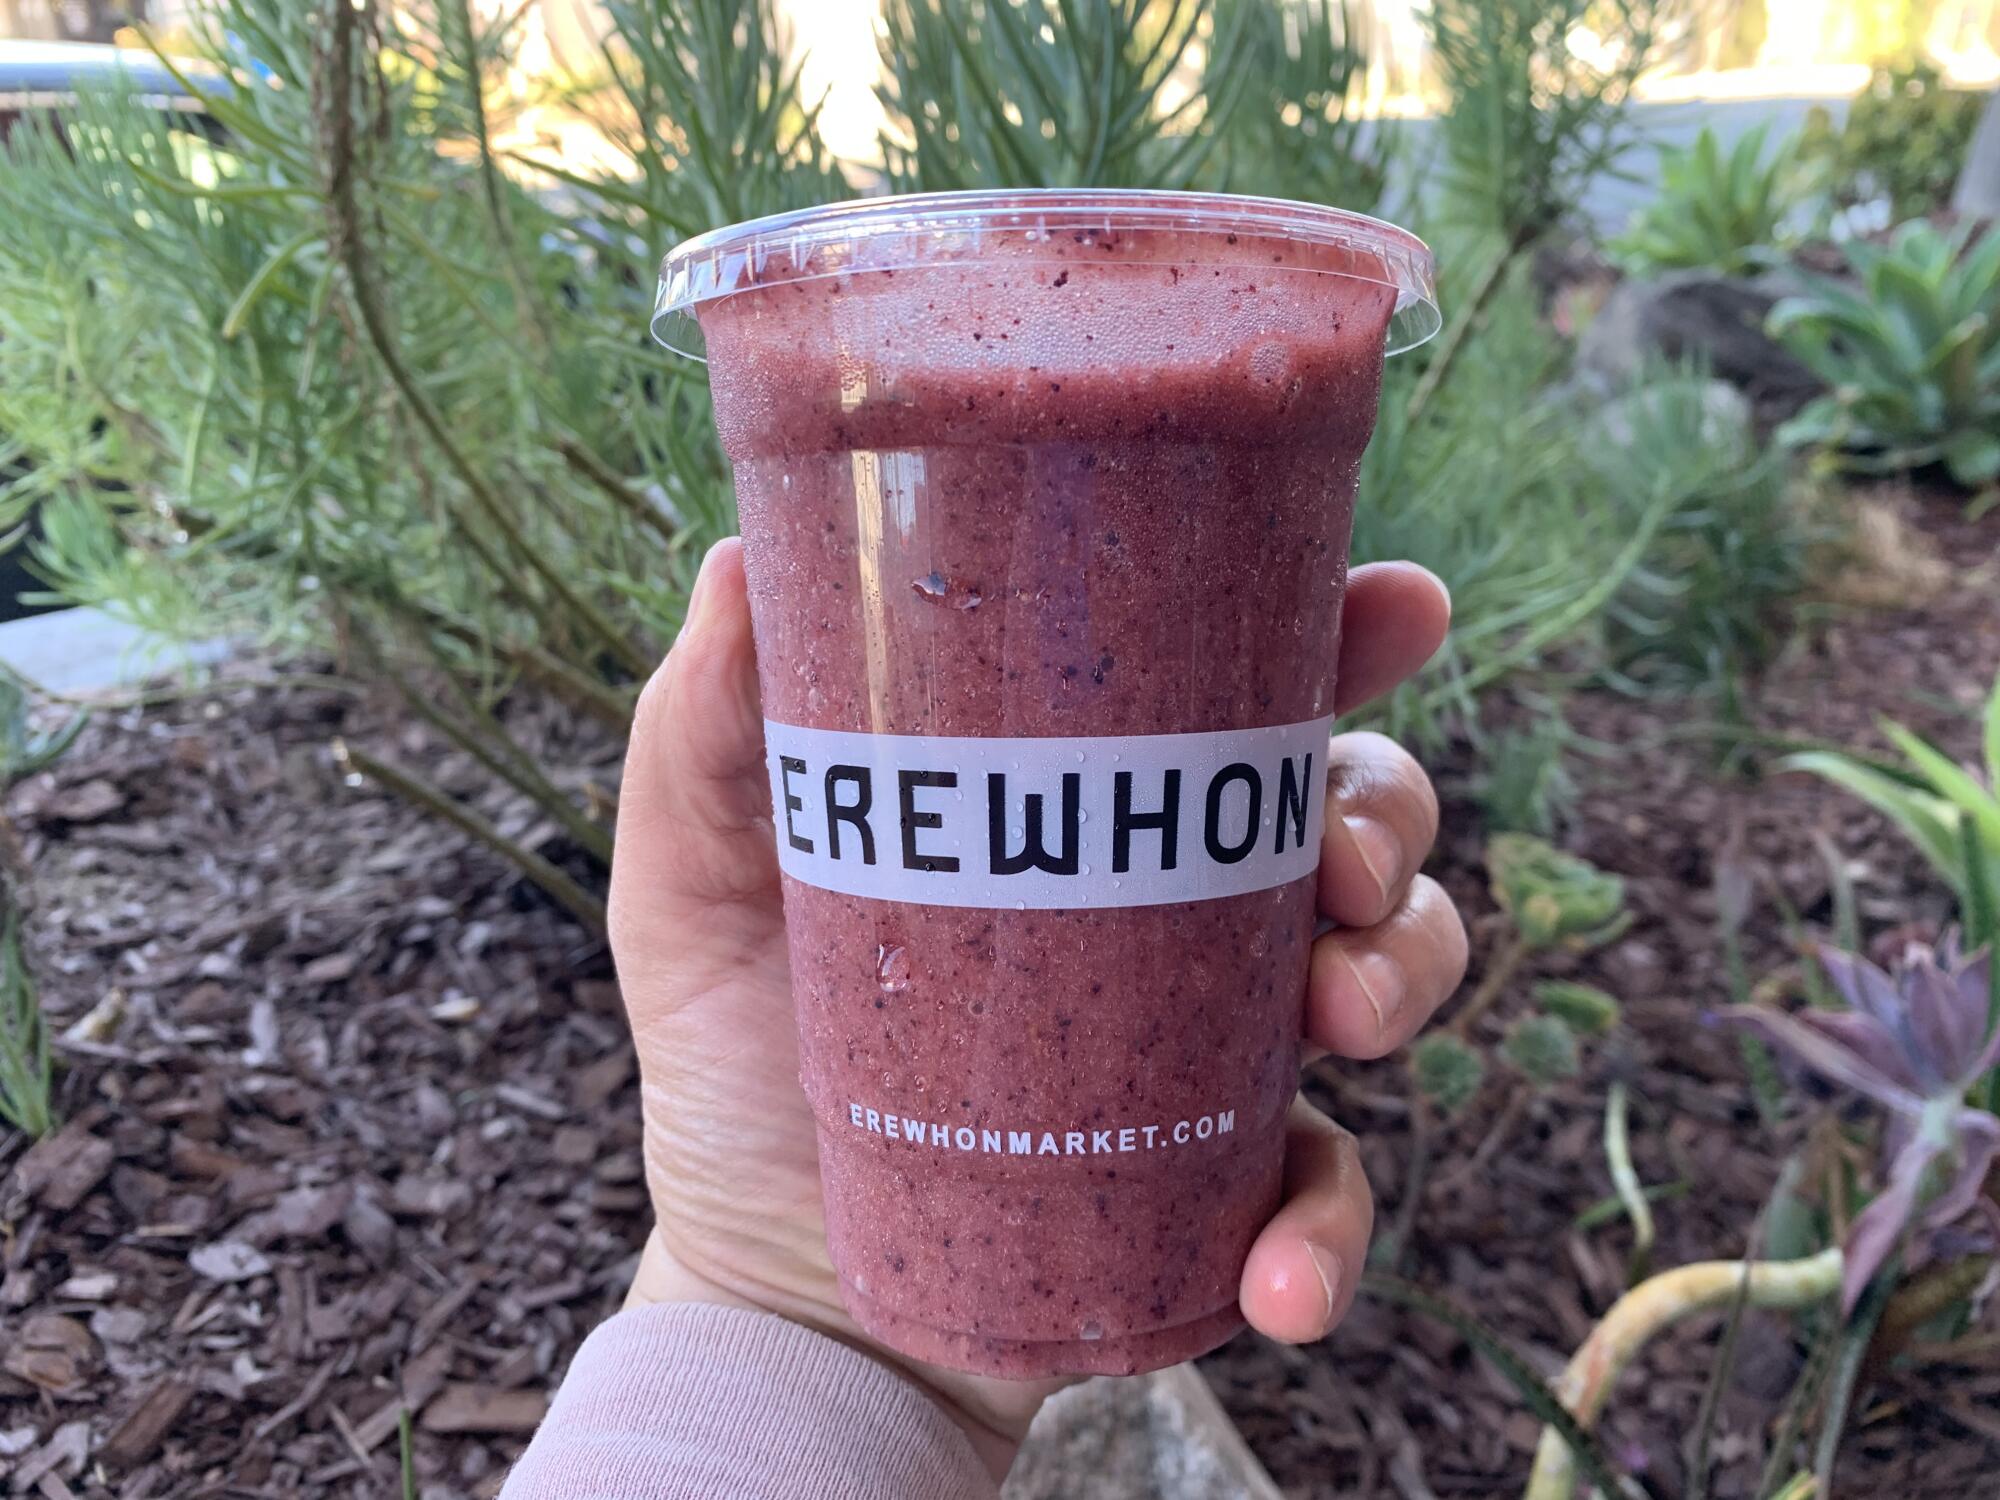 A hand holds a red smoothie in a plastic cup that says Erewhon.